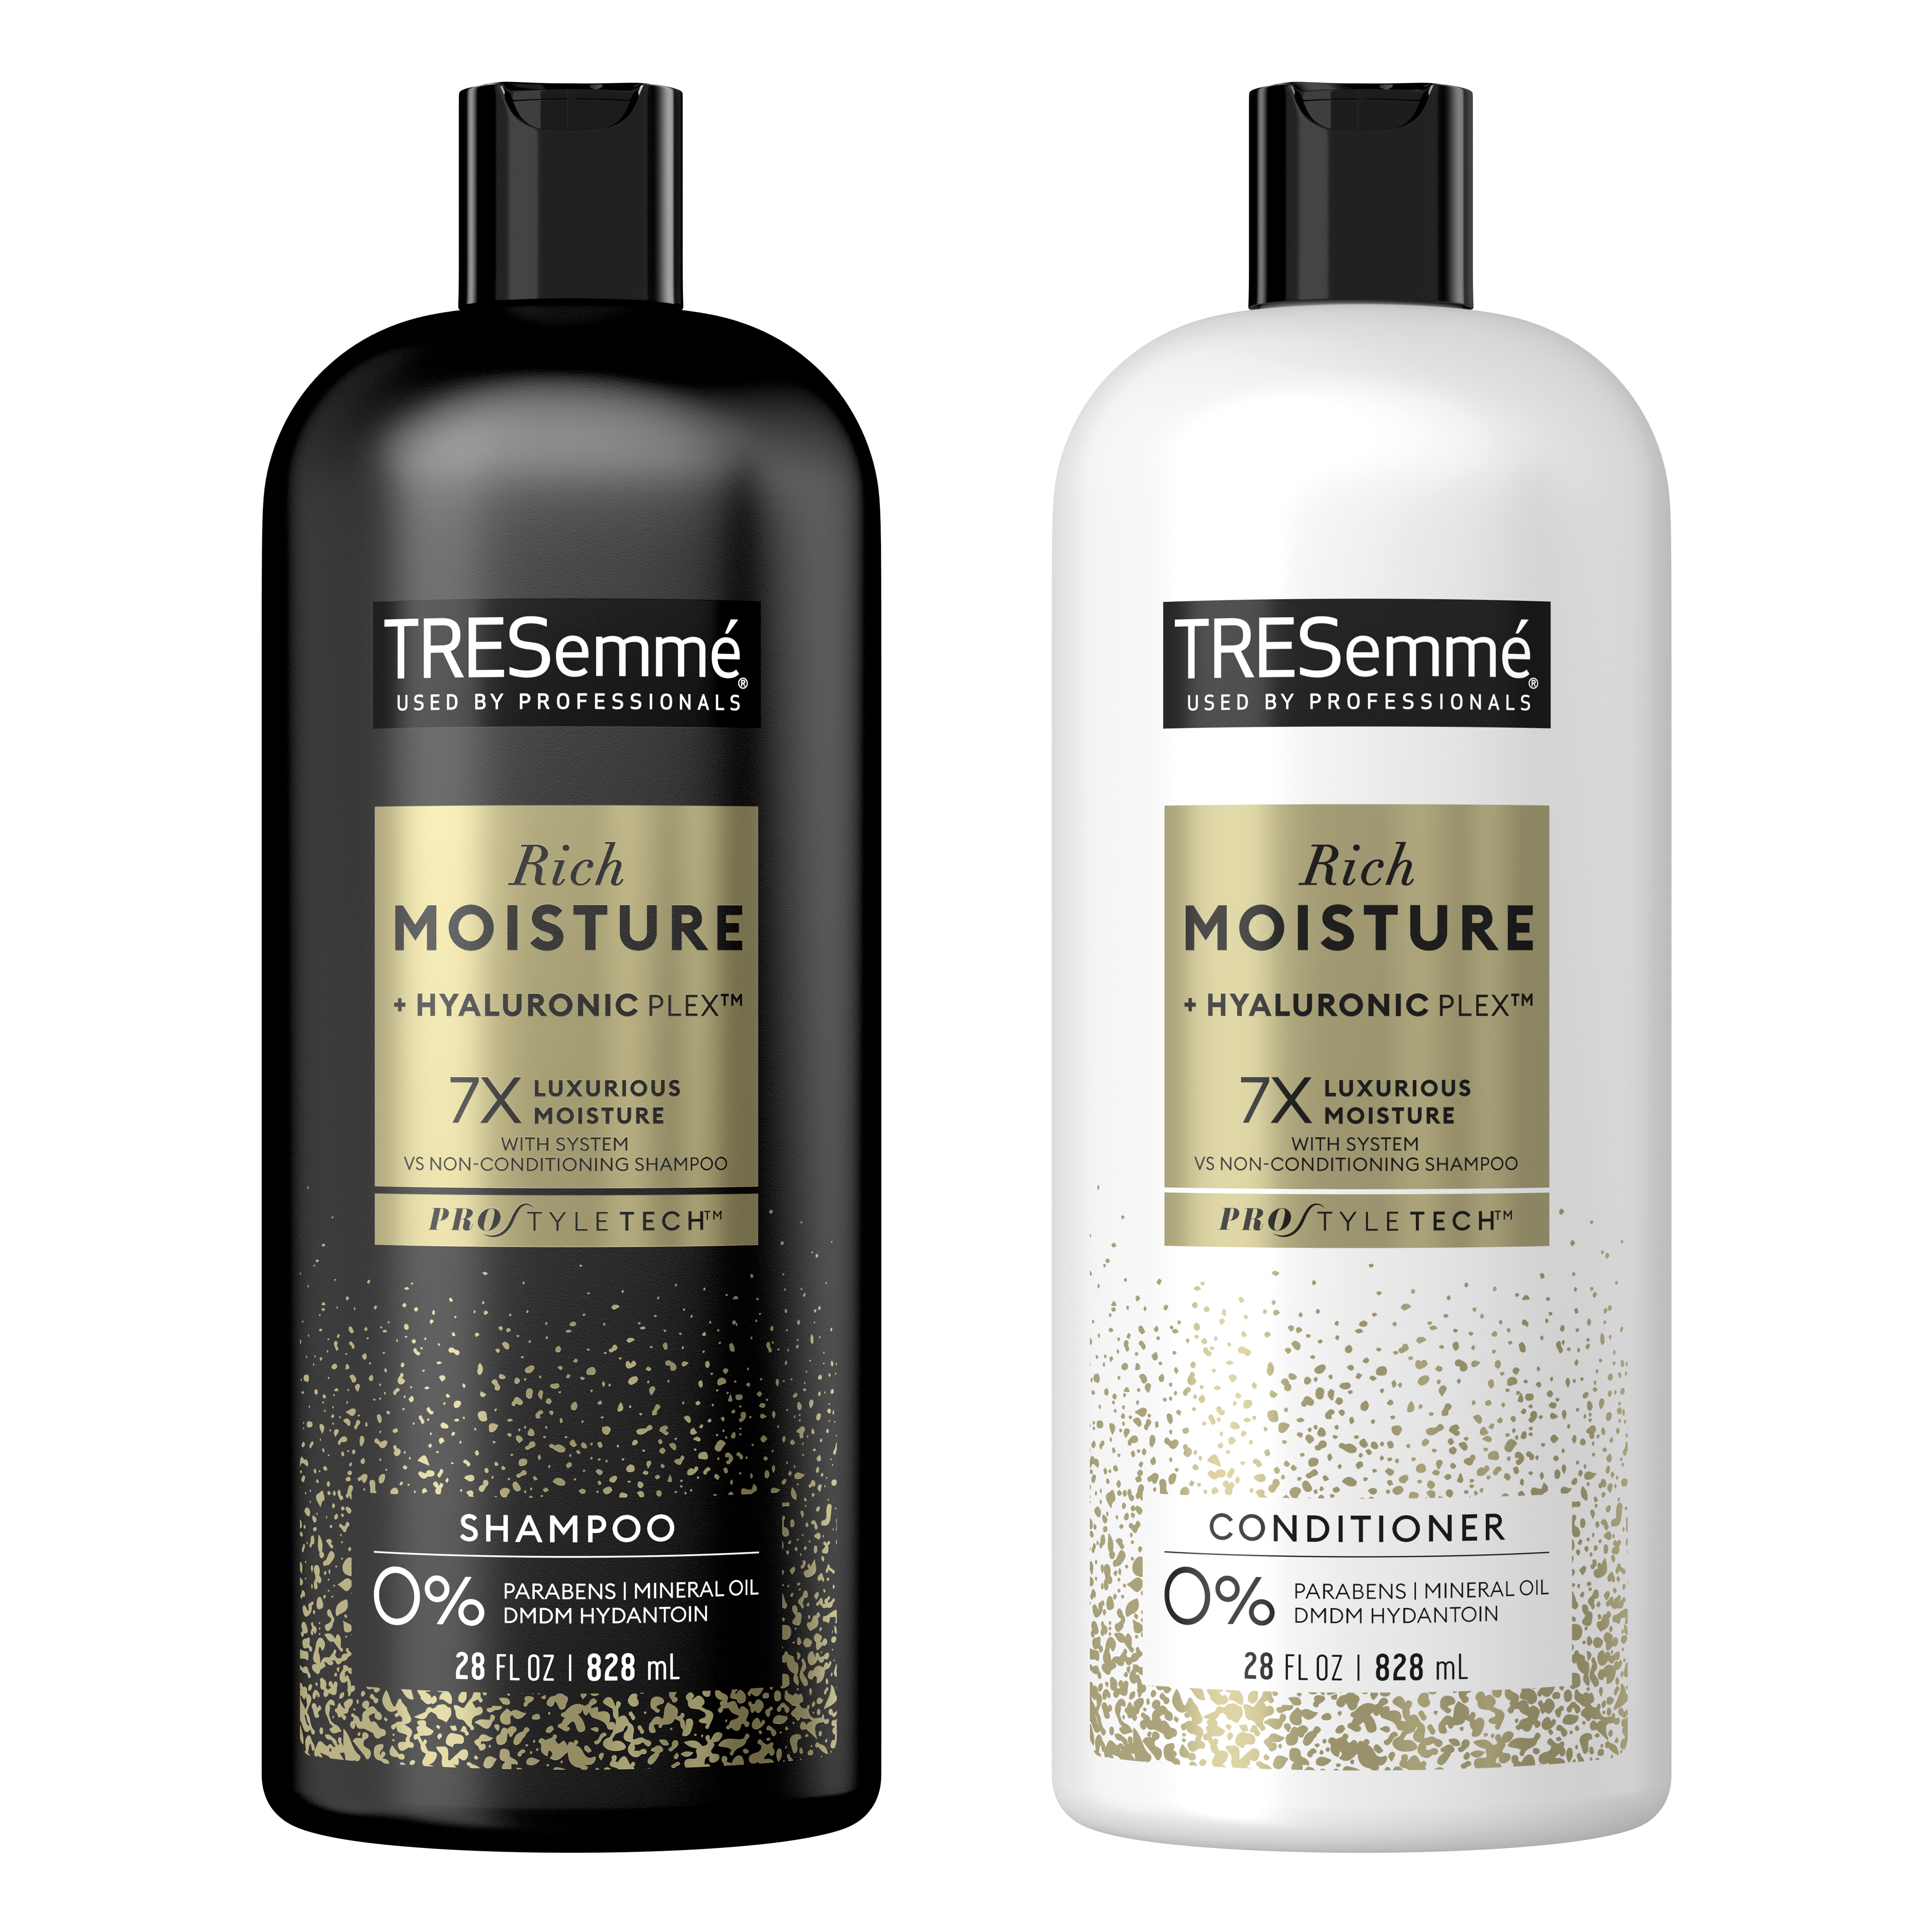 Tresemme Rich Moisture Rich Moisture Shampoo and Conditioner, 28 oz, 2 Count - image 1 of 10